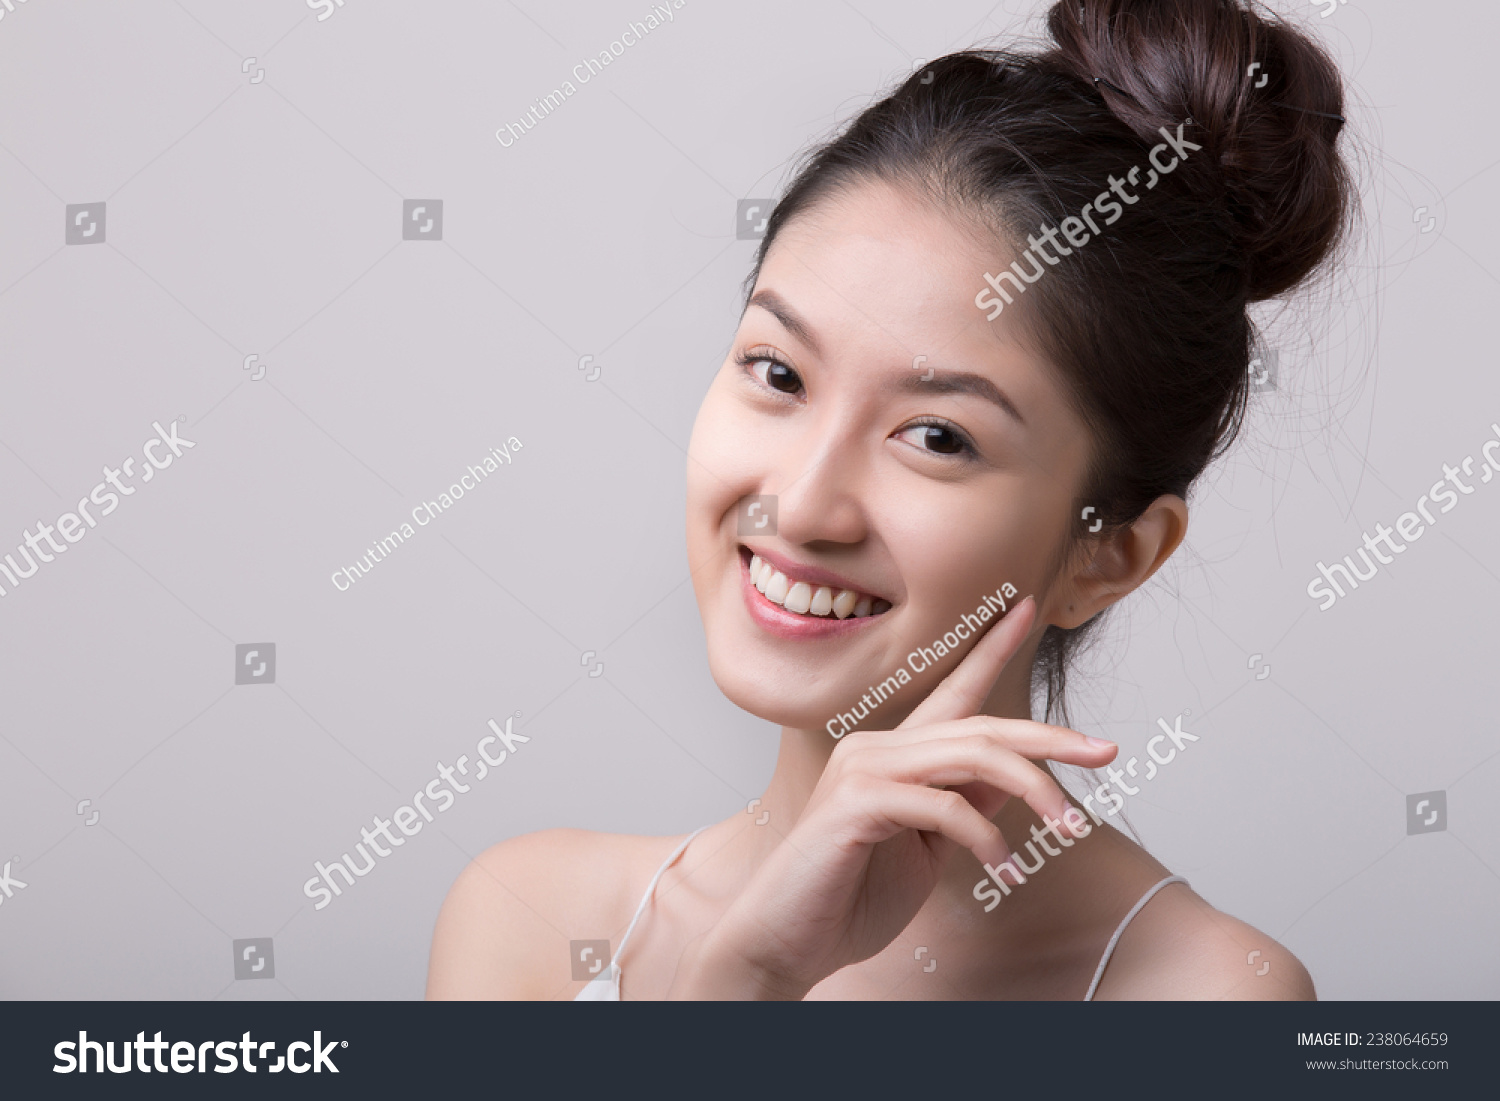 23210 Young Asian Girl Naked 이미지 스톡 사진 및 벡터 Shutterstock